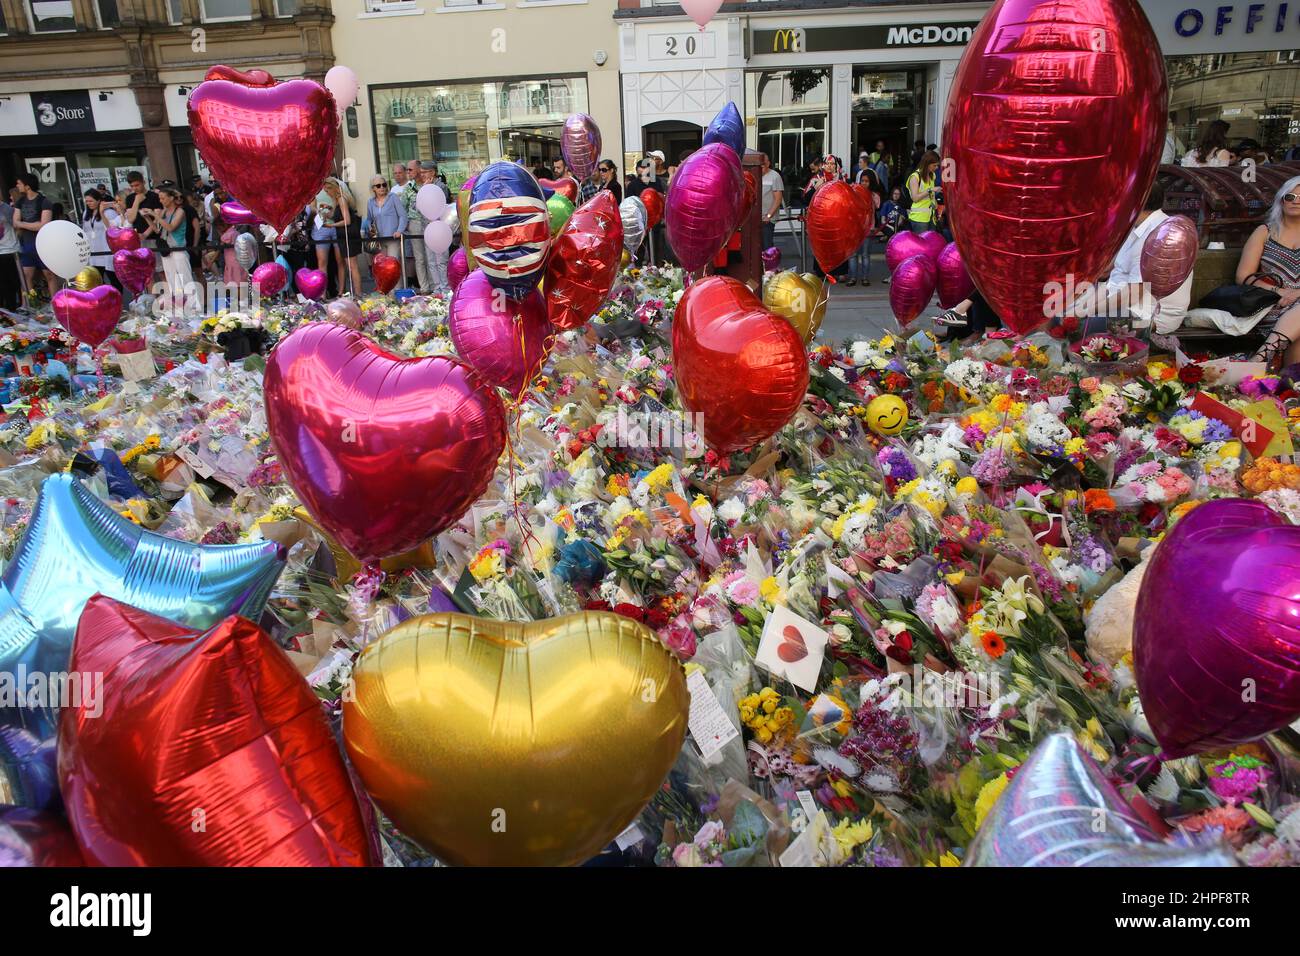 A massive floral tribute to the victims of the  Manchester bombing Stock Photo